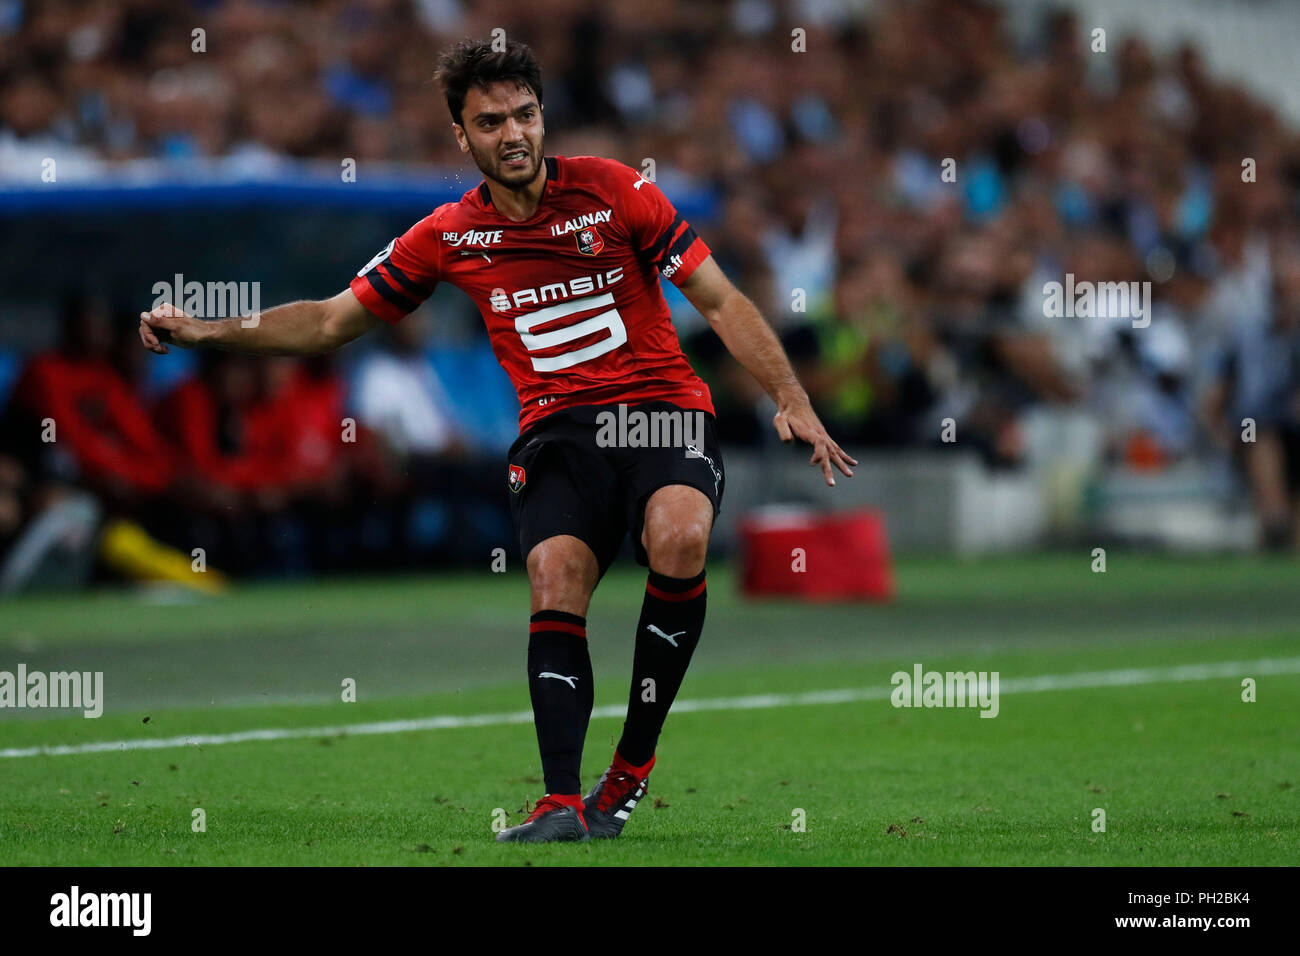 Marseille, France. Credit: D. 26th Aug, 2018. Clement Grenier (Rennes) Football/Soccer : French 'Ligue 1' match between Olympique de Marseille 2-2 Rennes at Velodrome stadium in Marseille, France. Credit: D .Nakashima/AFLO/Alamy Live News Stock Photo